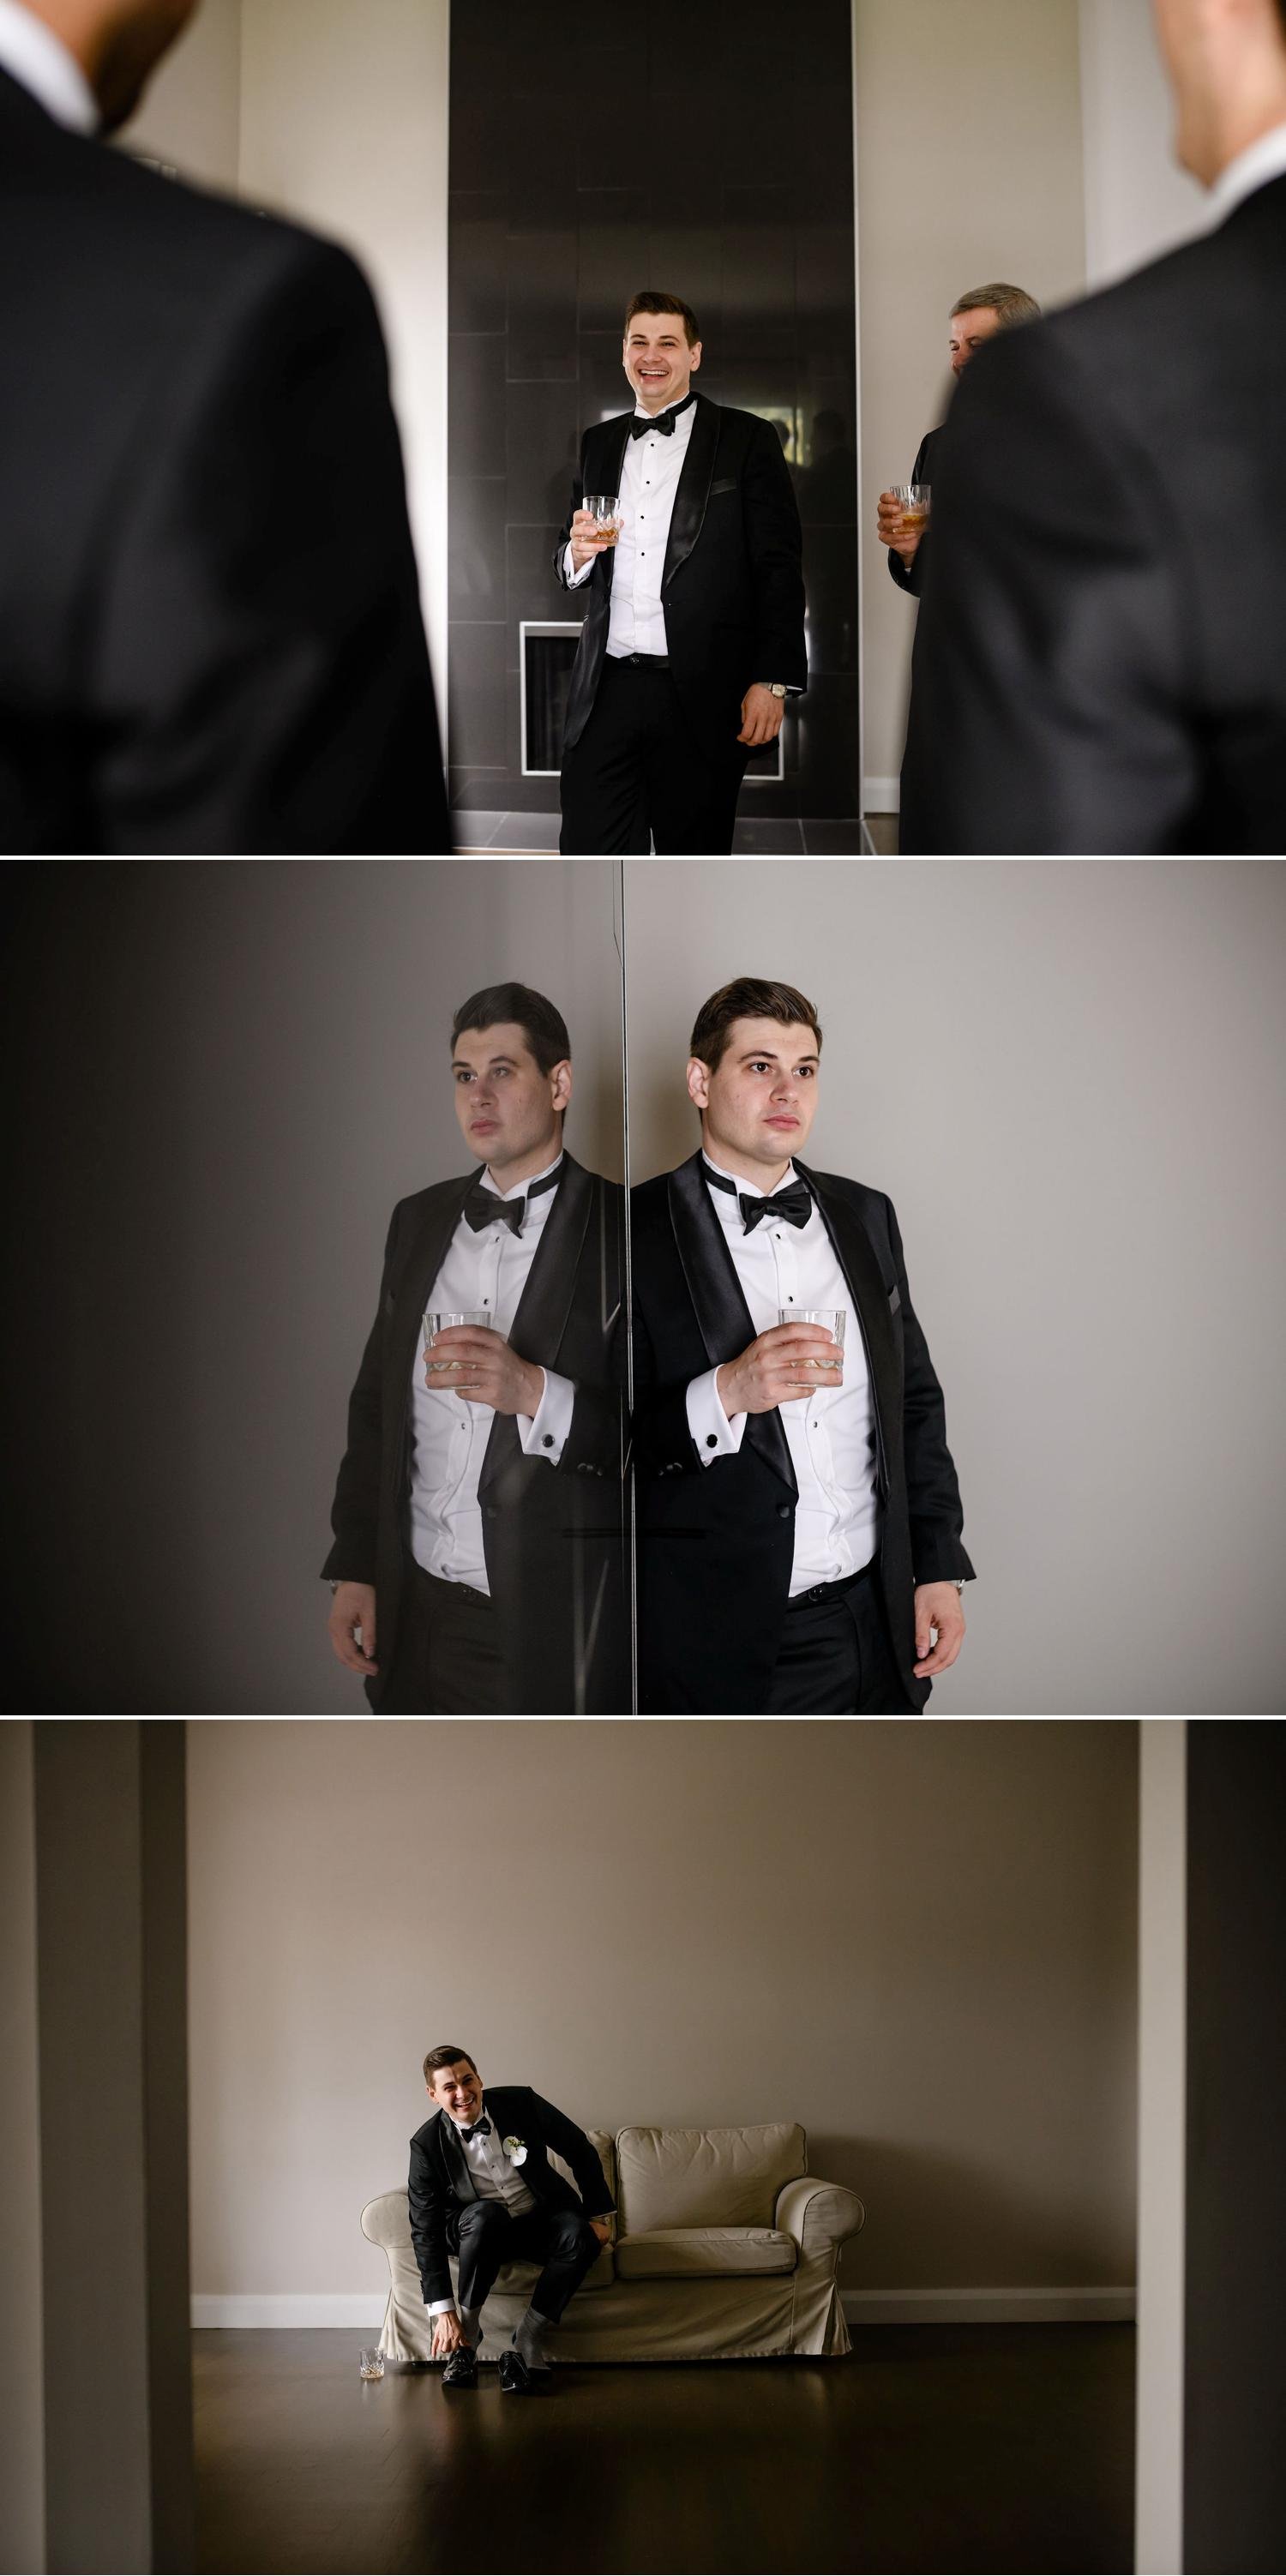 photos of a groom getting ready for his wedding